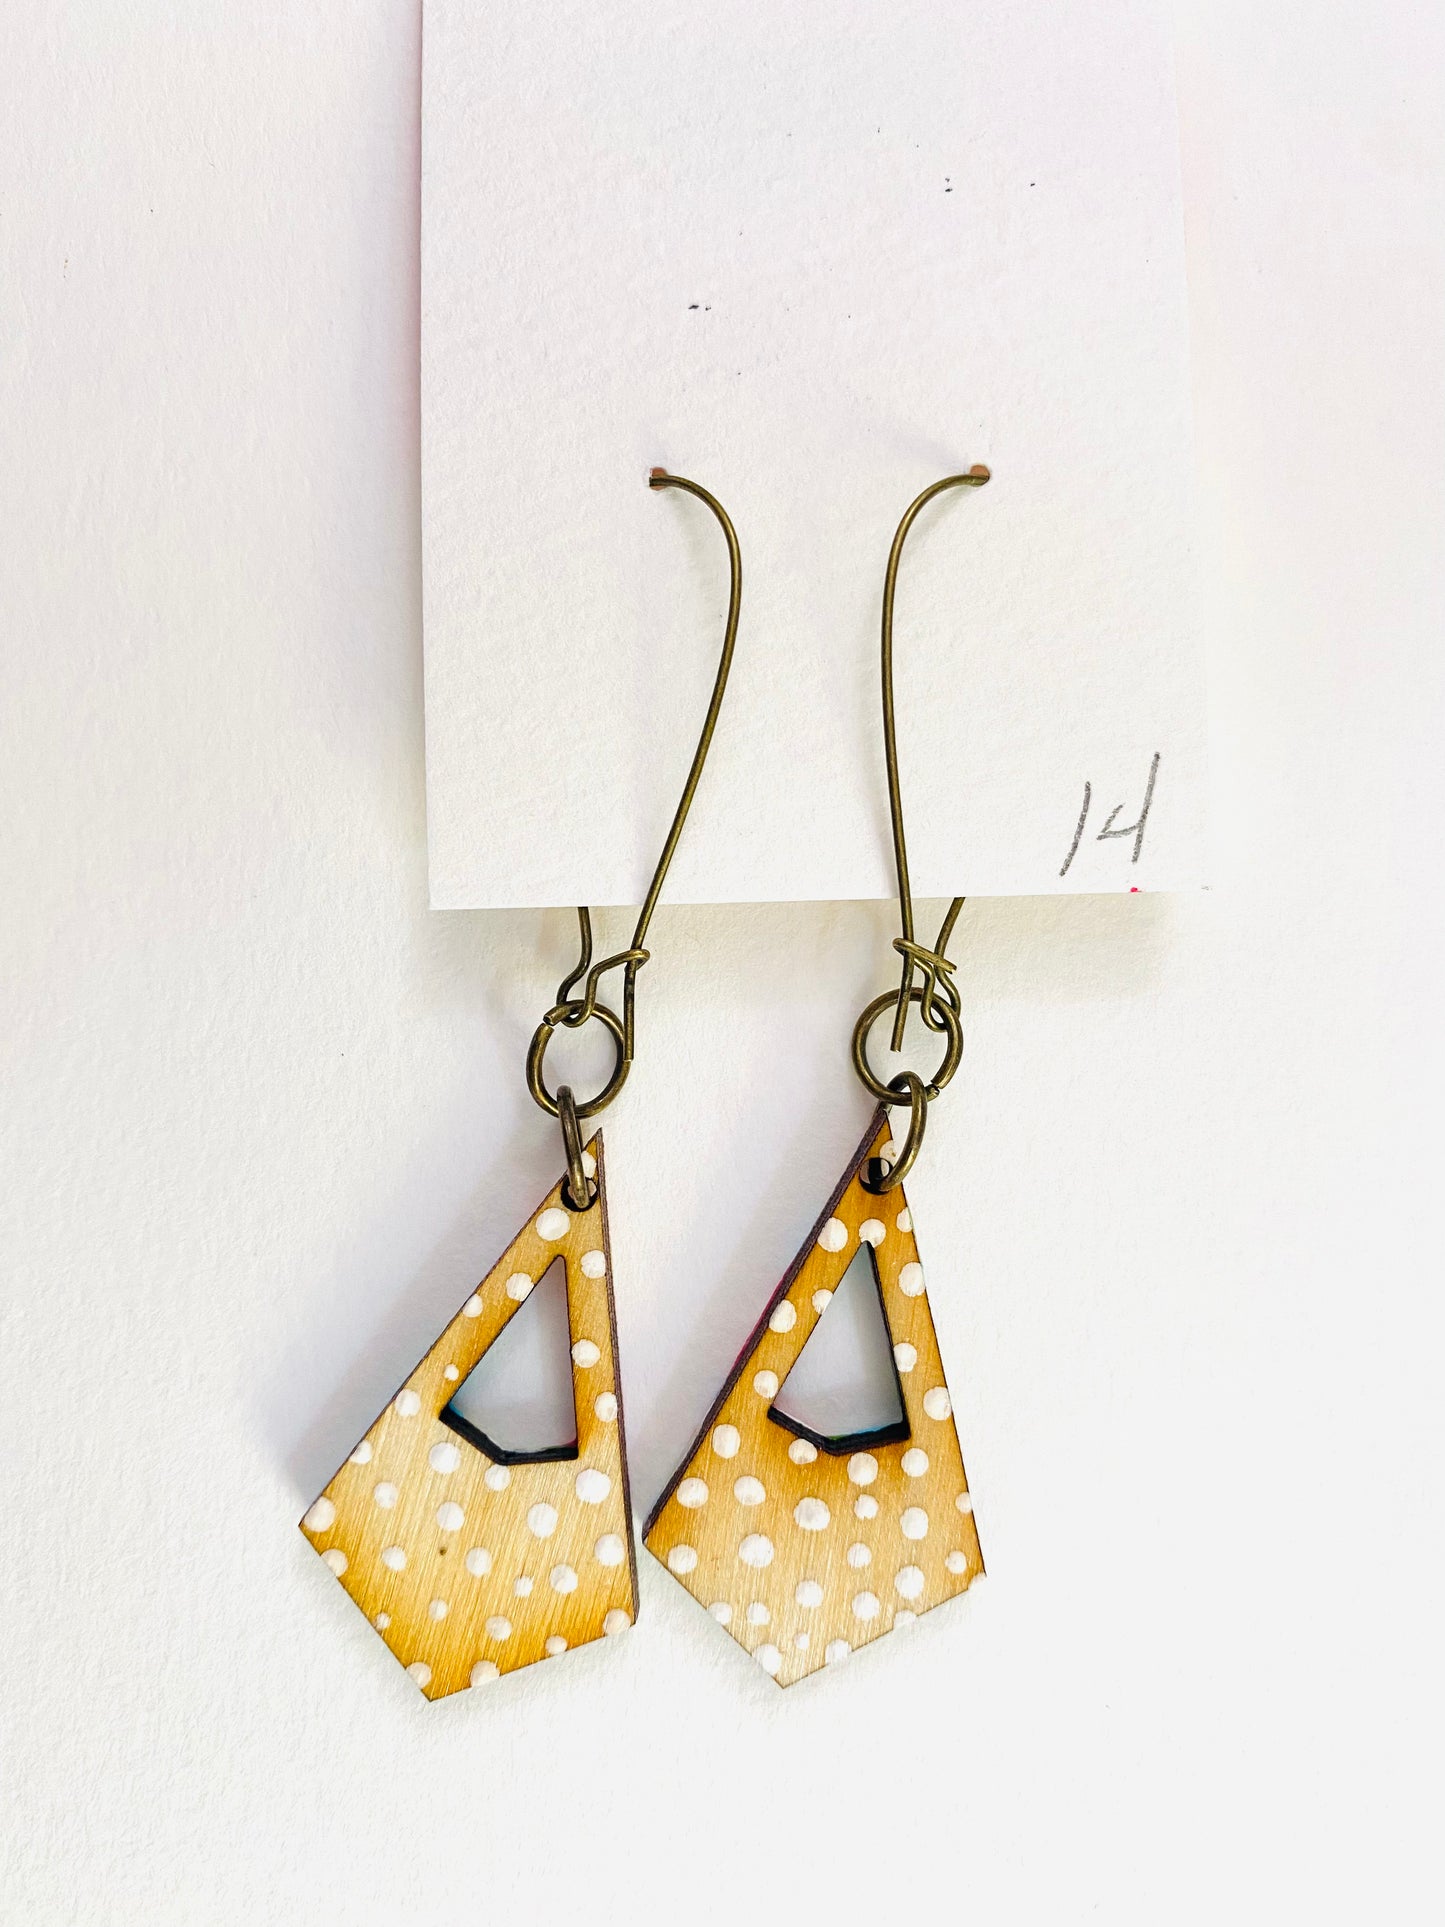 Colorful, Hand Painted, Geometric Shaped Earrings 14